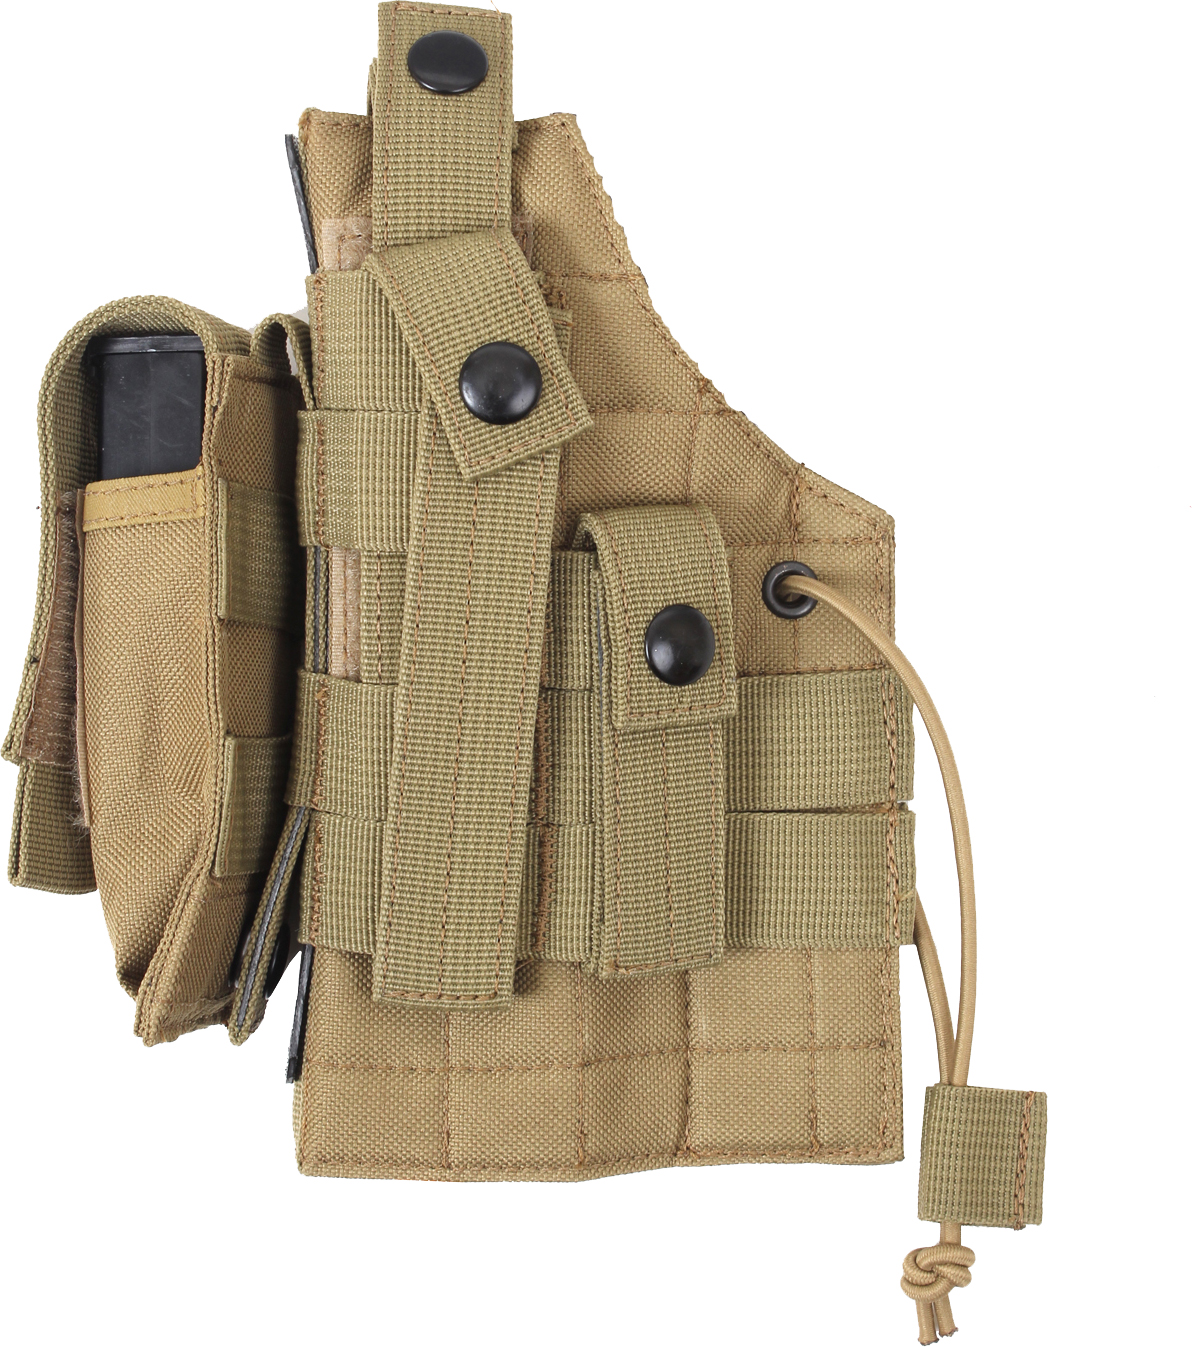 Rothco Coyote Brown MOLLE Modular Ambidextrous Holster